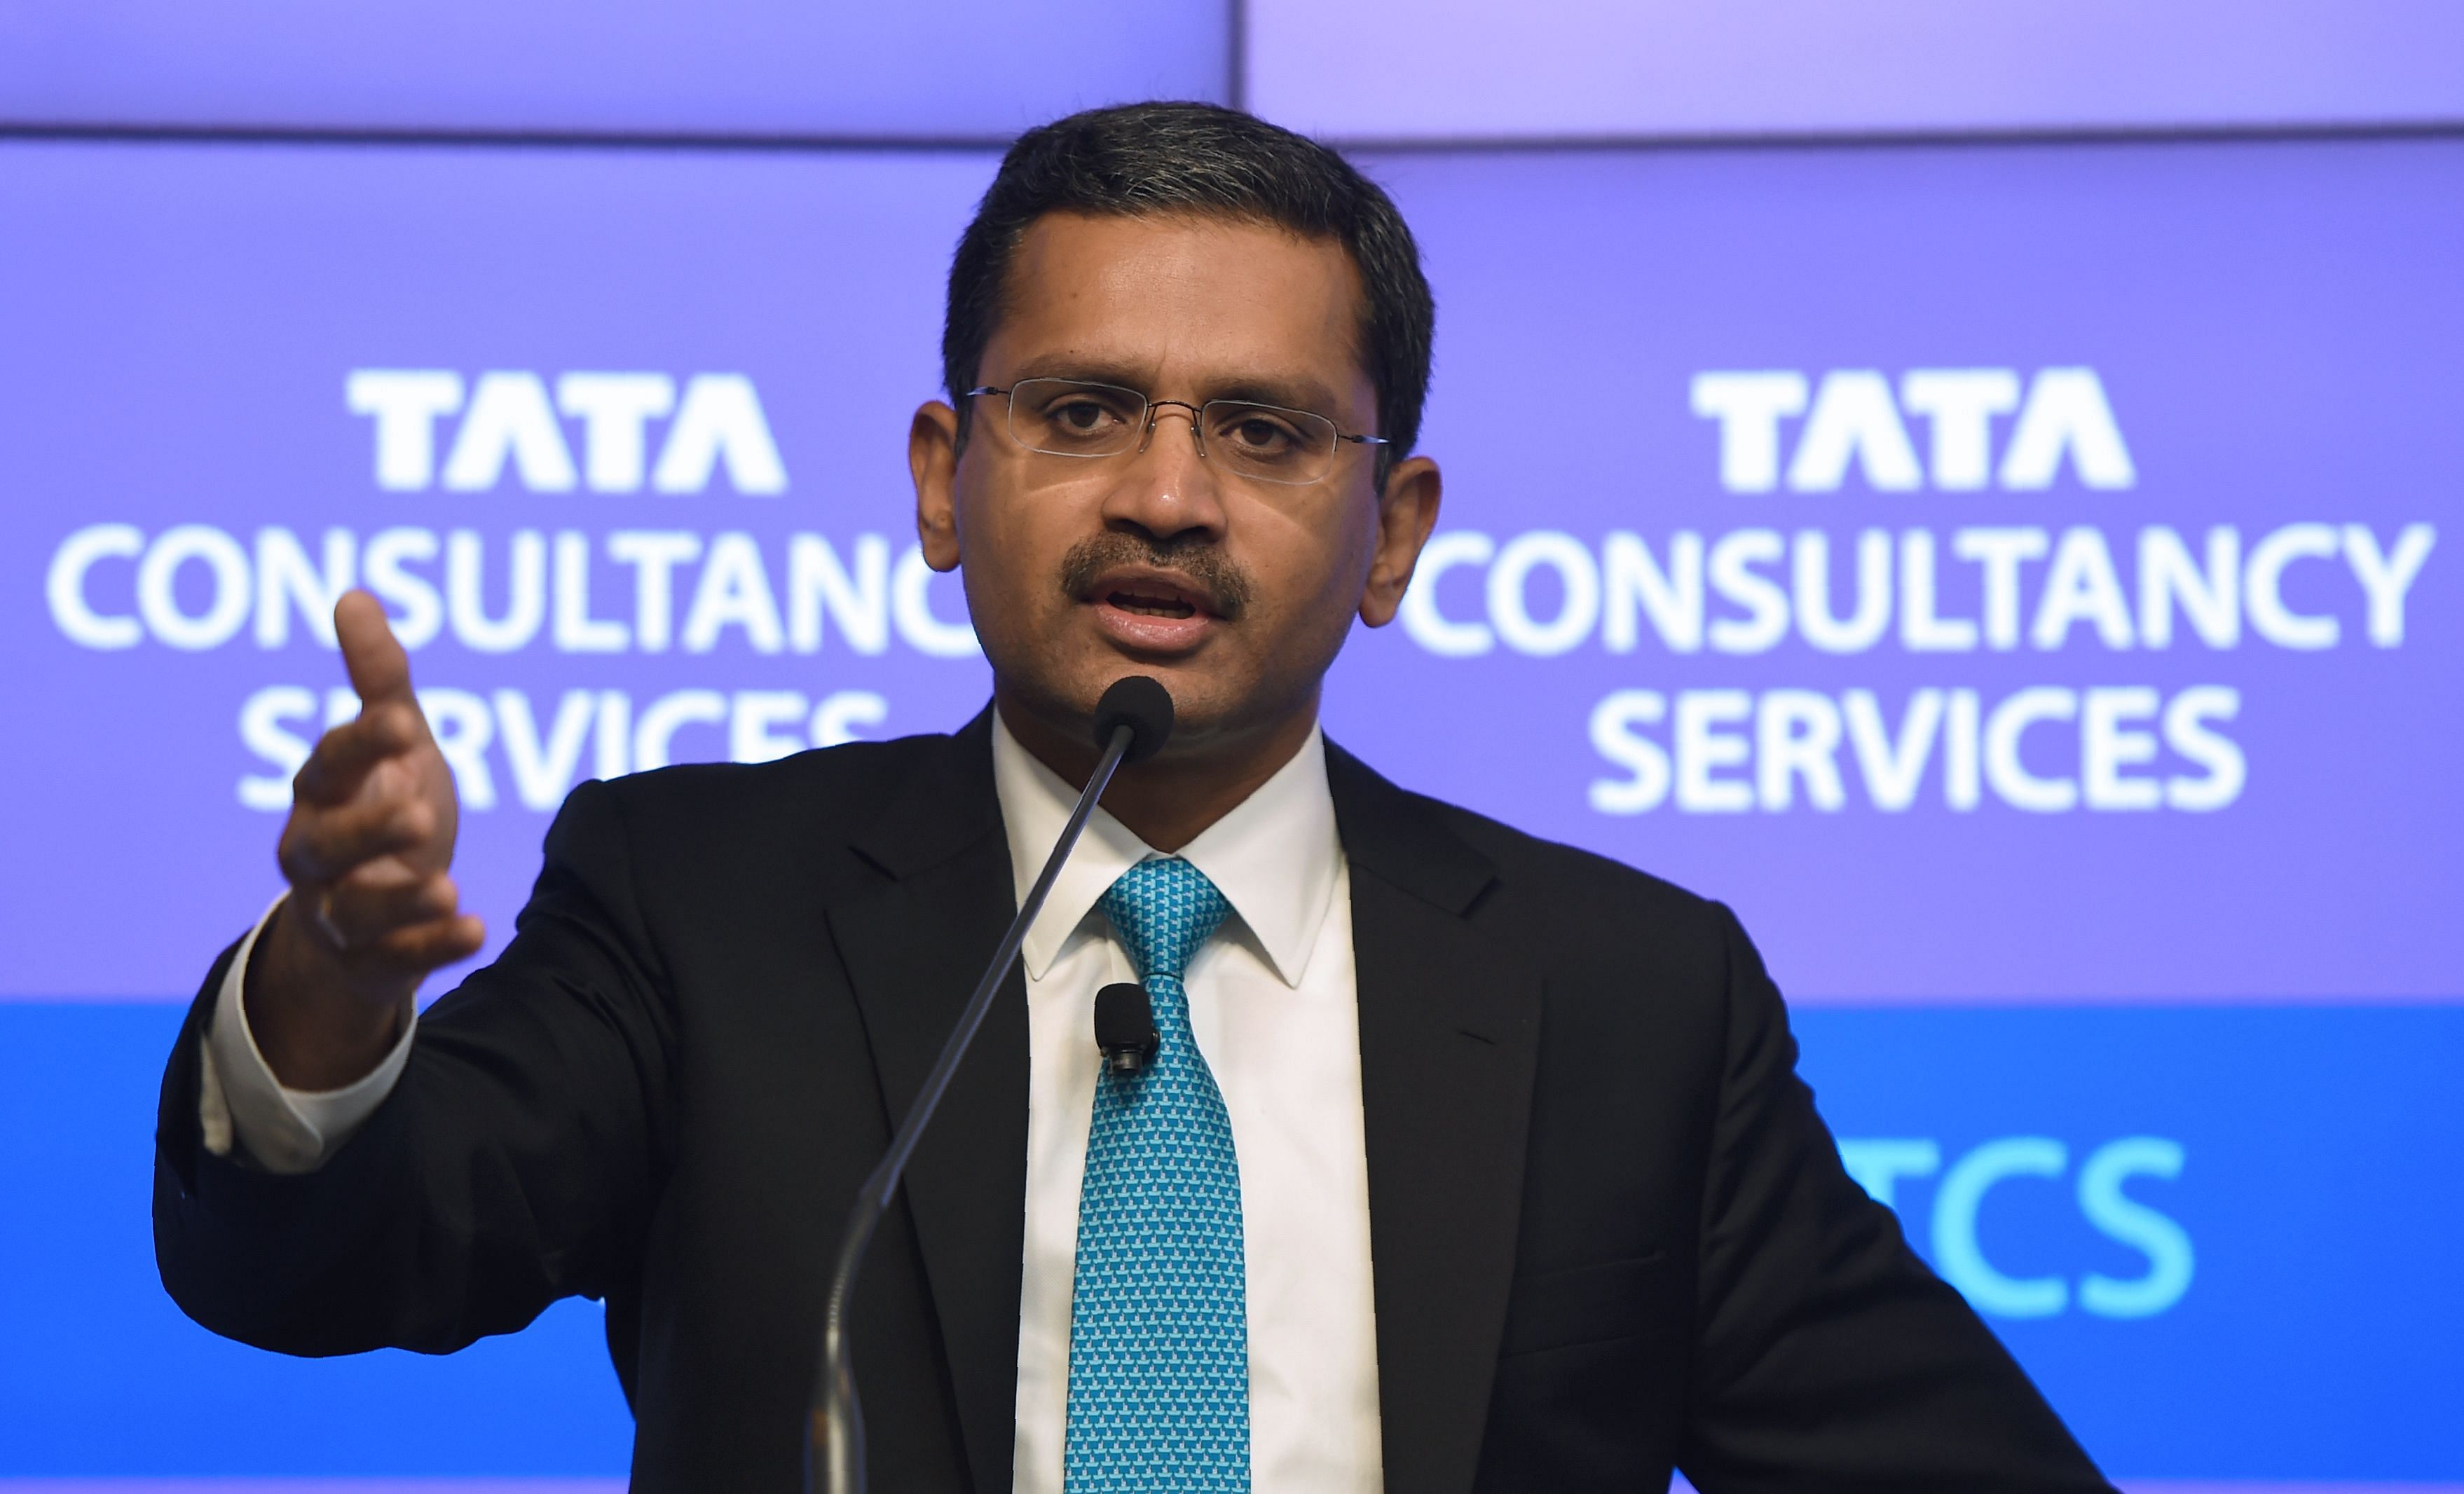 India's Tata Consultancy Services (TCS) CEO and Managing Director Rajesh Gopinathan. Credits: AFP Photo